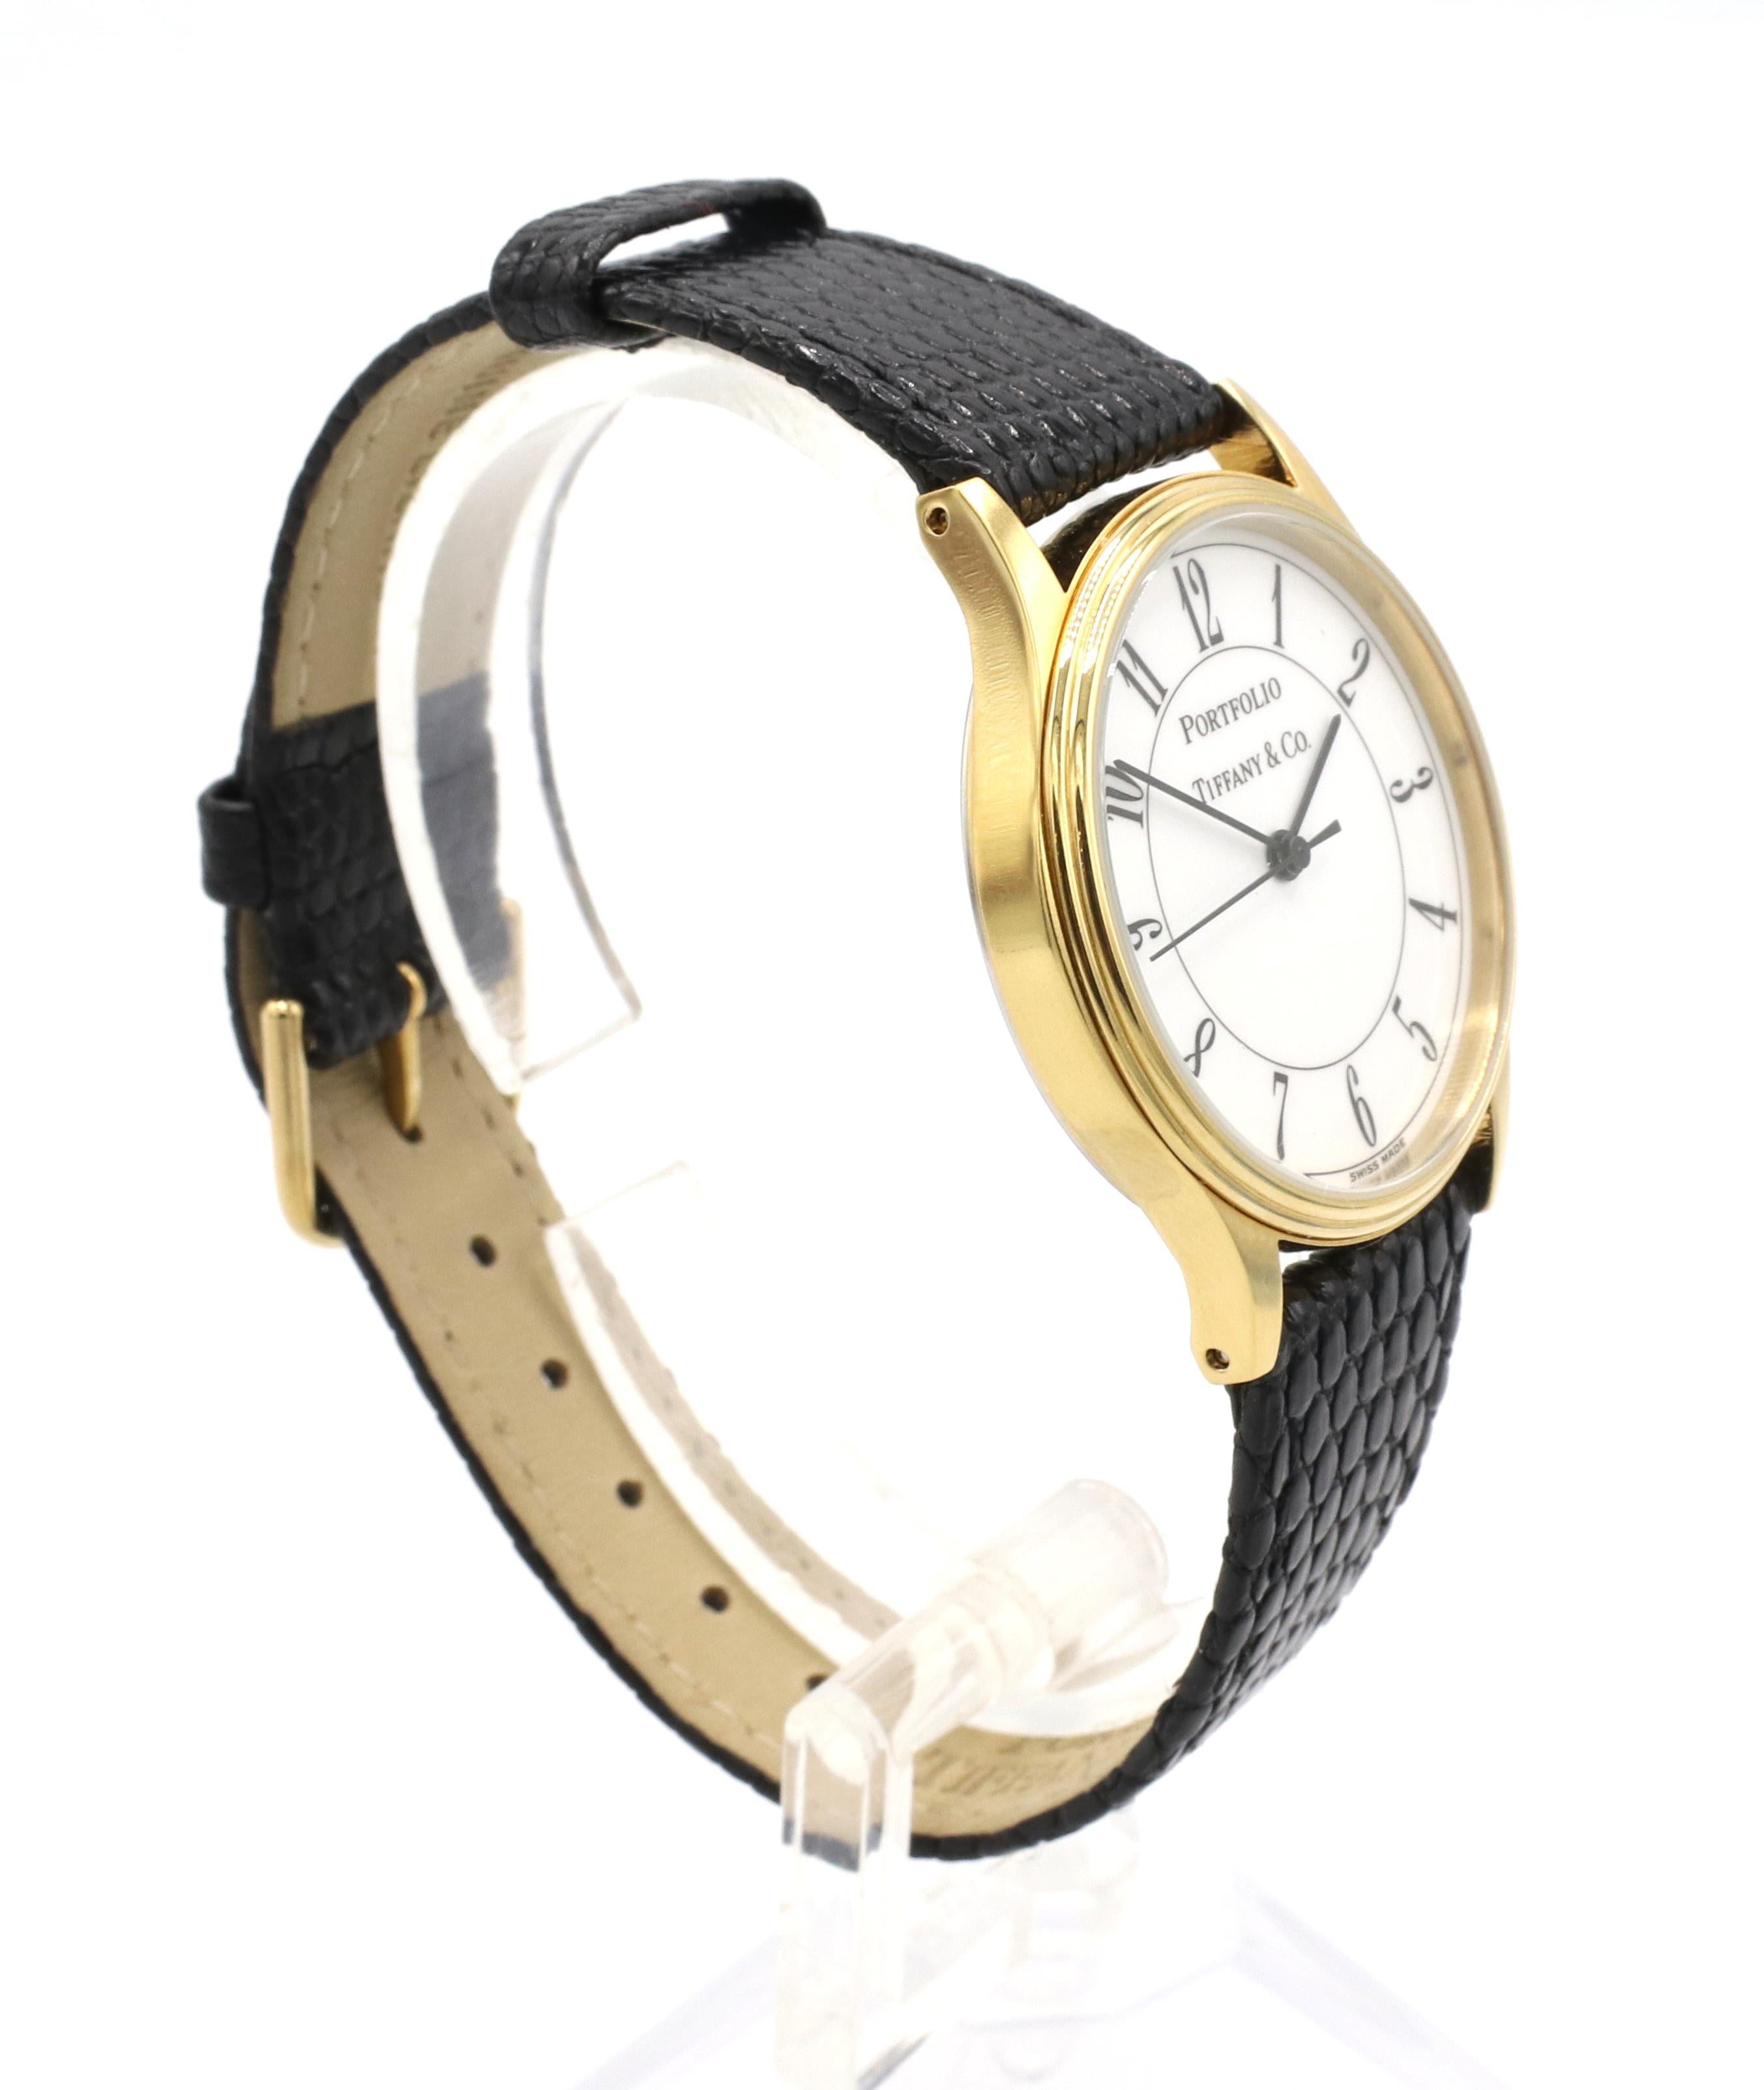 Tiffany and Co. Portfolio White Dial Black Leather Strap Quartz Watch

Case material: Gold plated and stainless steel
Dial: White
Movement: Quartz
Case size: 32mm
Strap: Genuine Lizard Leather, Black, Tiffany & Co
Band width: 18
Water resistant: 10